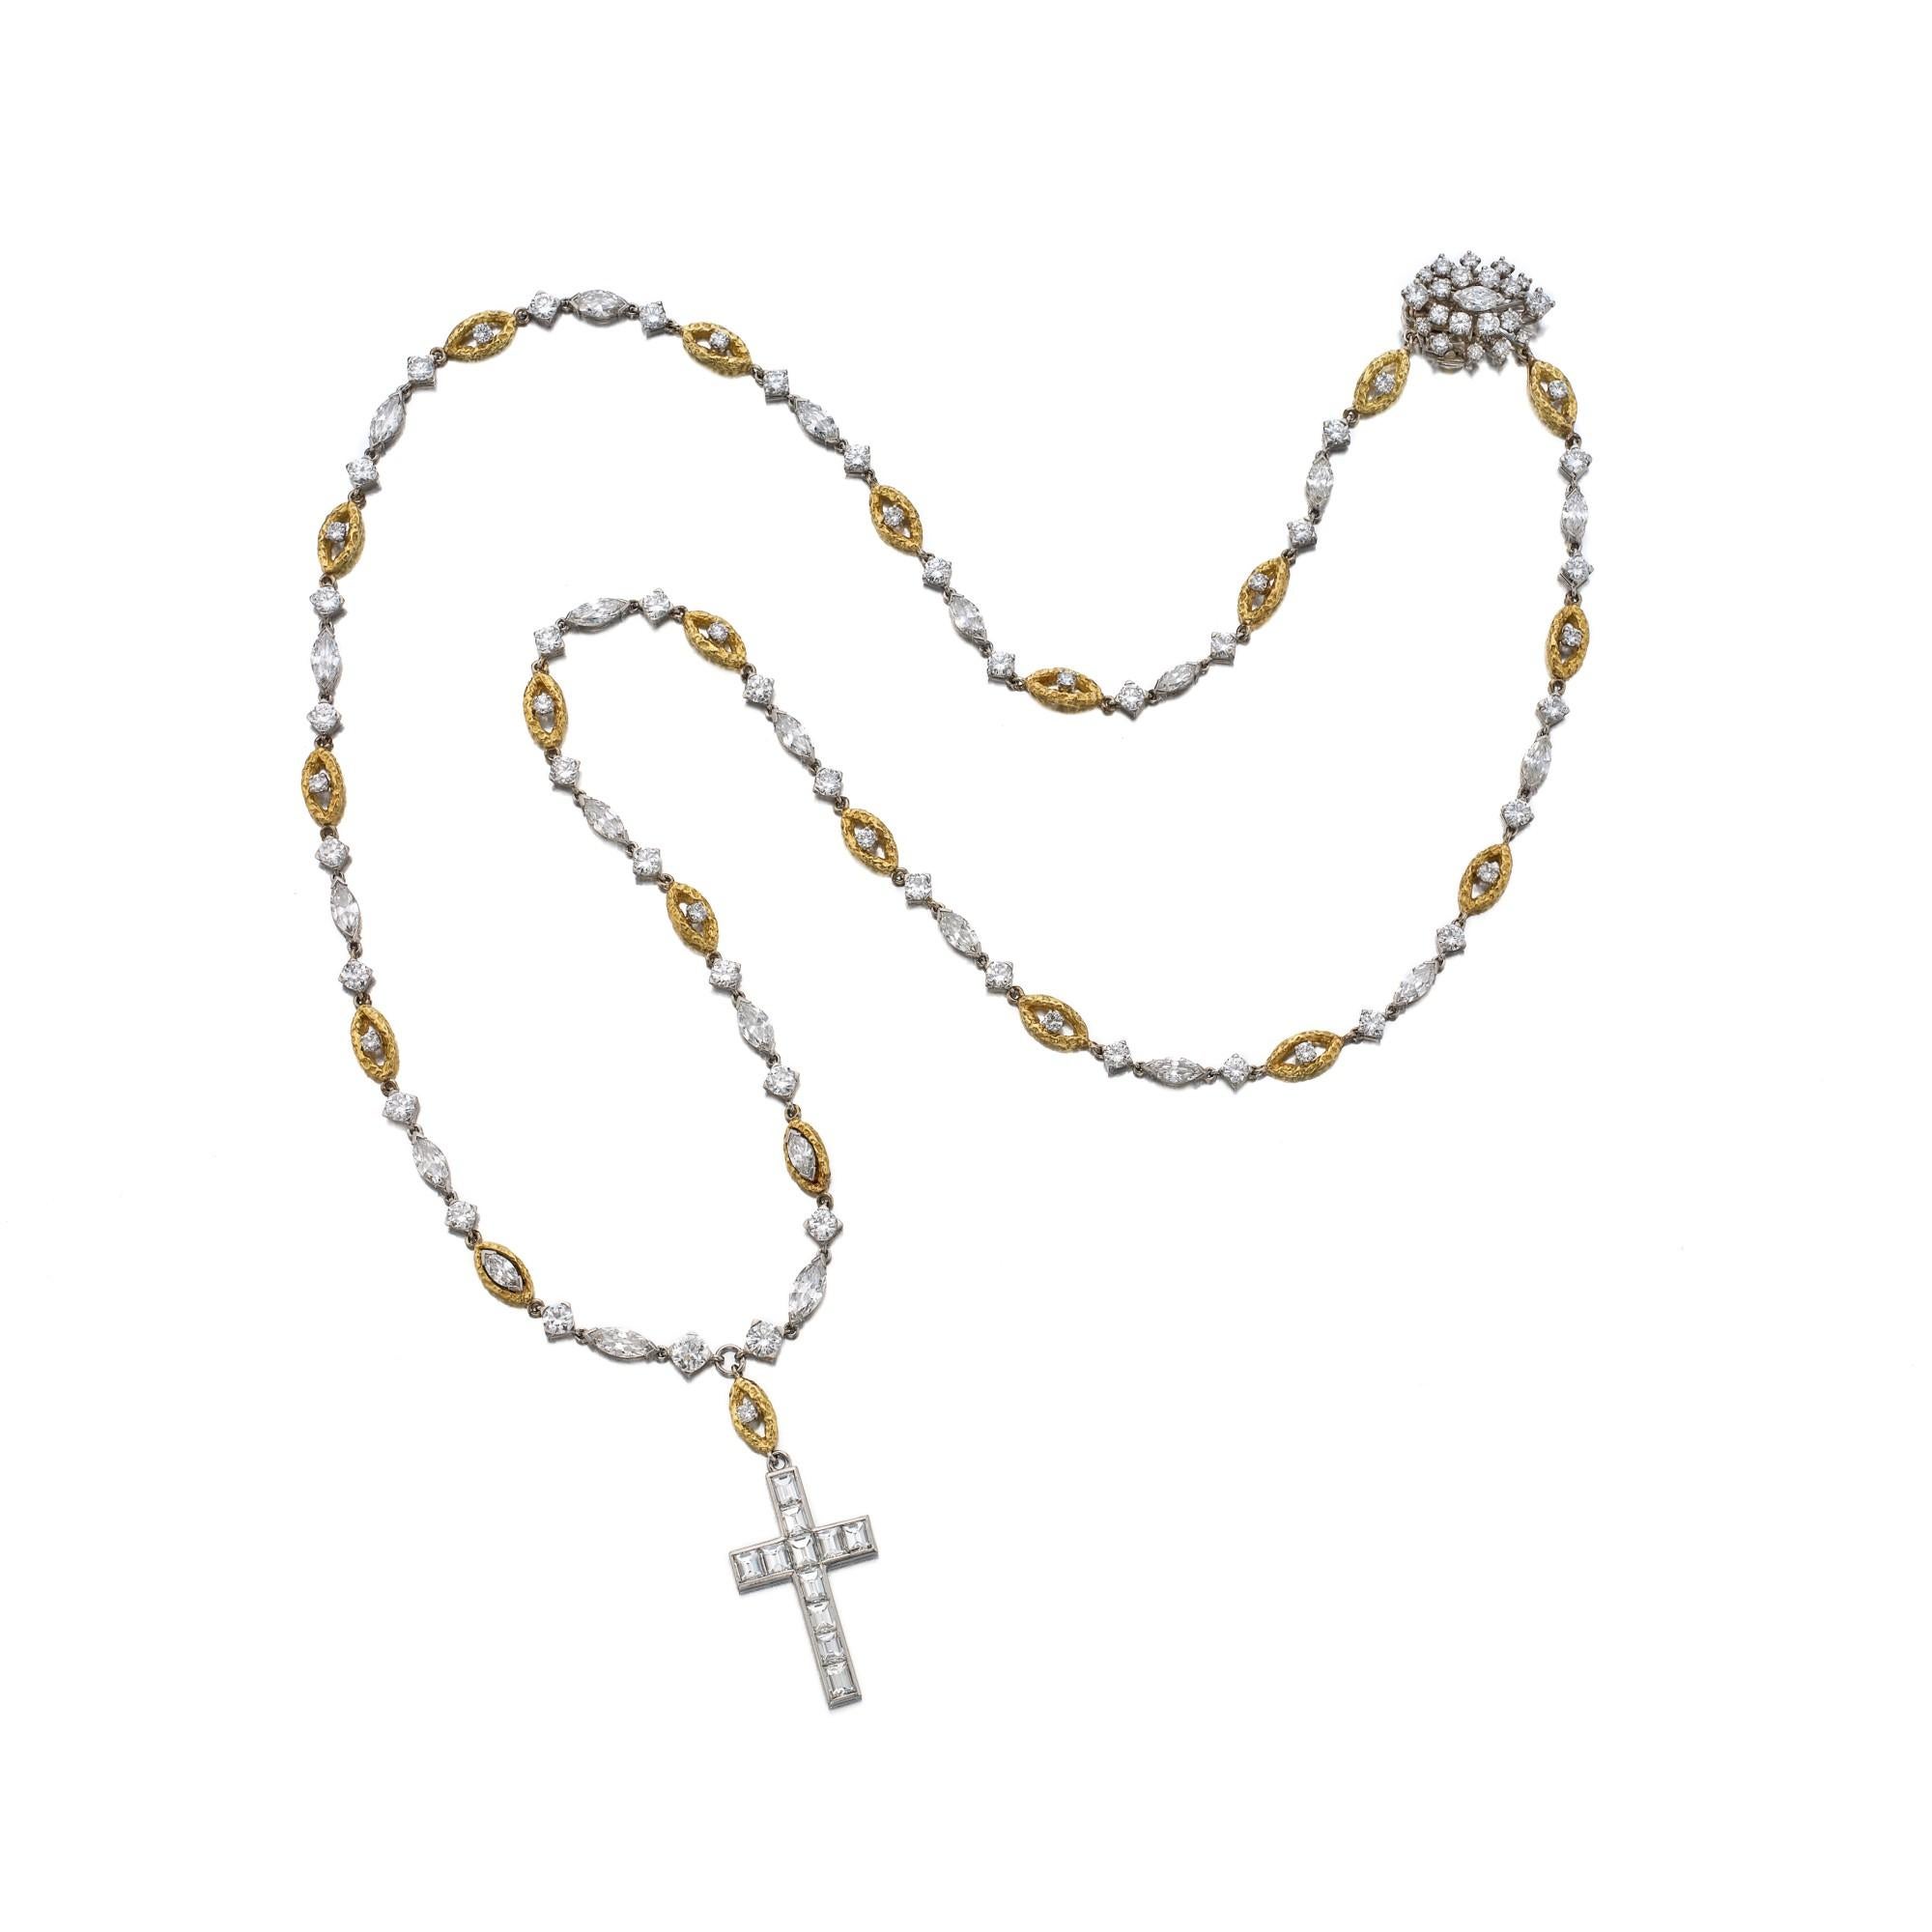 Cartier Diamond Cross Pendant- Necklace In Platinum And 18k Yellow  Gold. The chain ofthis necklace alternates navette and square-shaped links, equipped with box clasp with a security lock. The lock and each of the links are set with old marquise,